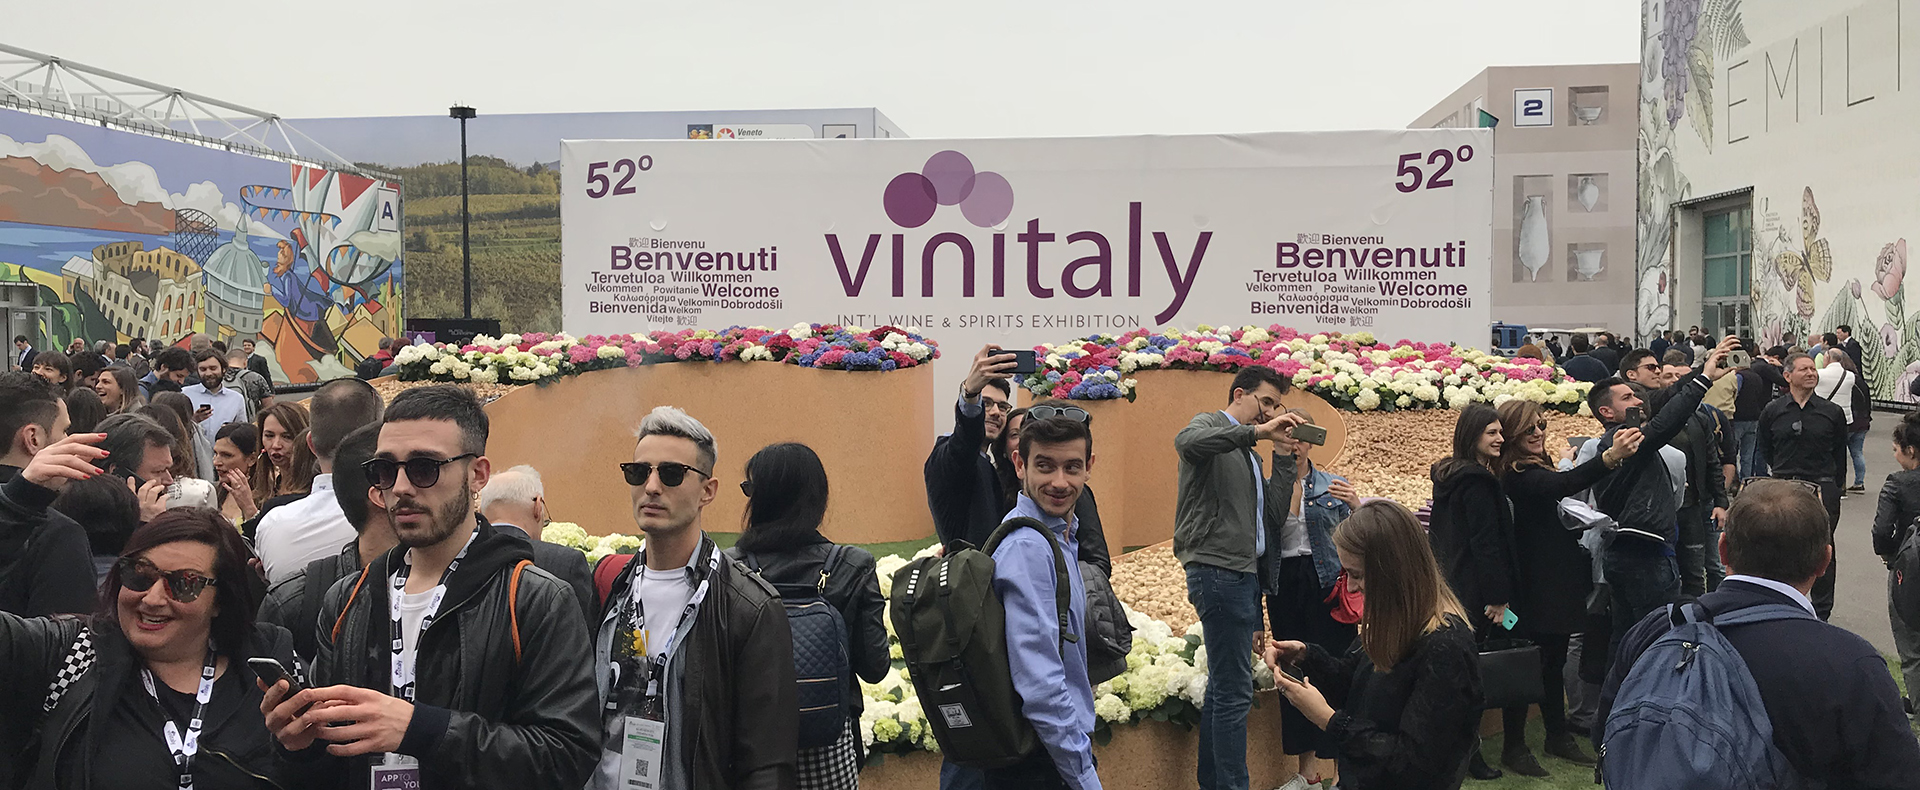 Vinitaly: Taste with the Cantele family April 7-10 in Verona (Hall 11, Stand E2)